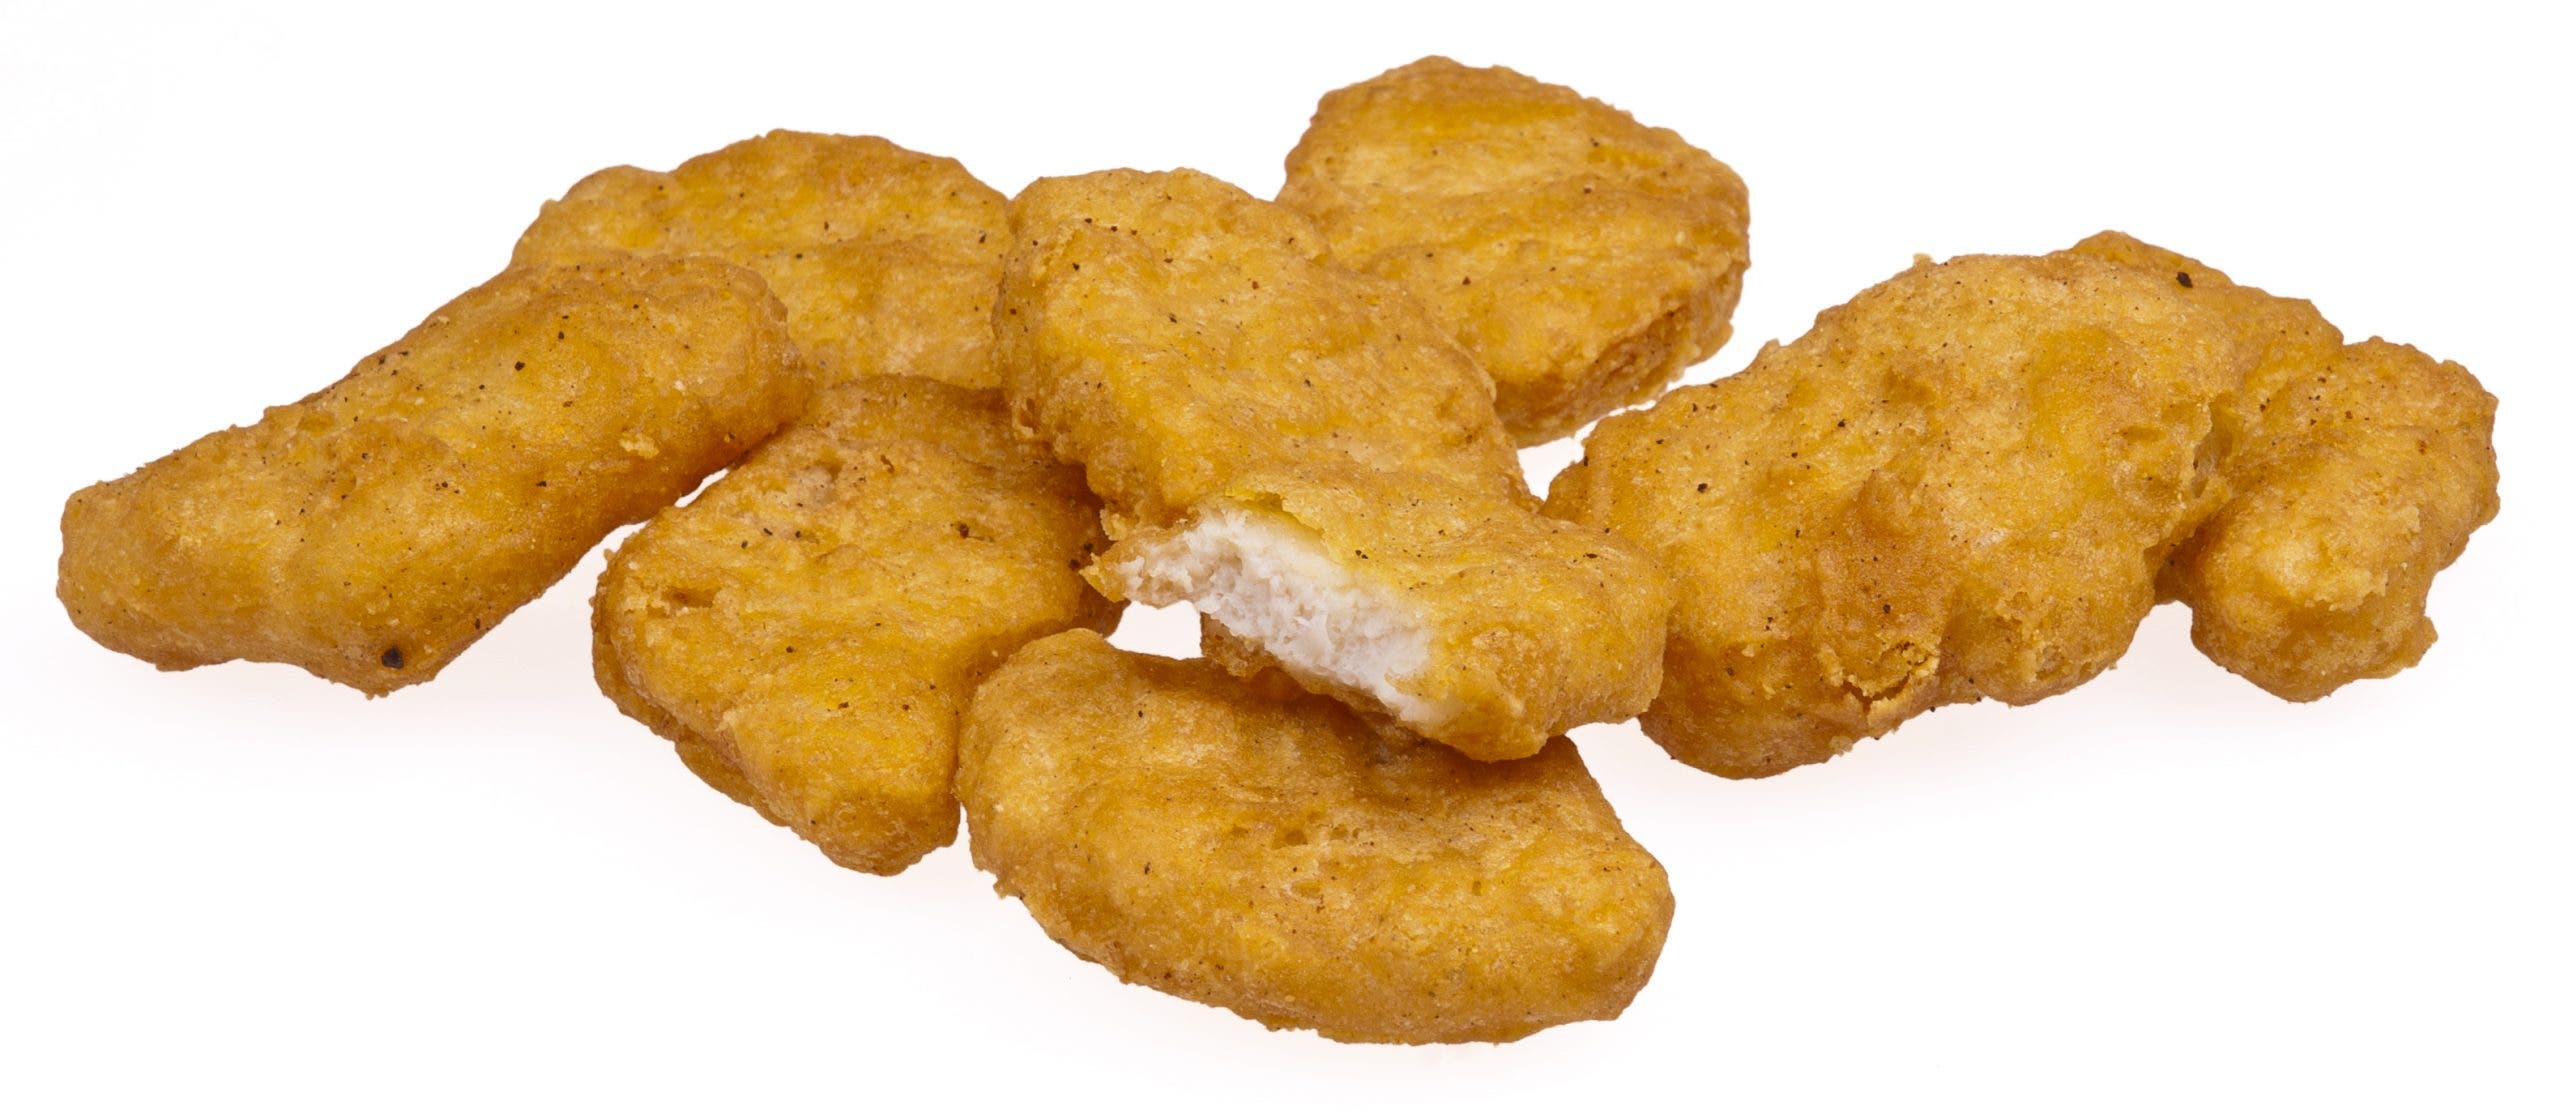 mcnuggets scaled